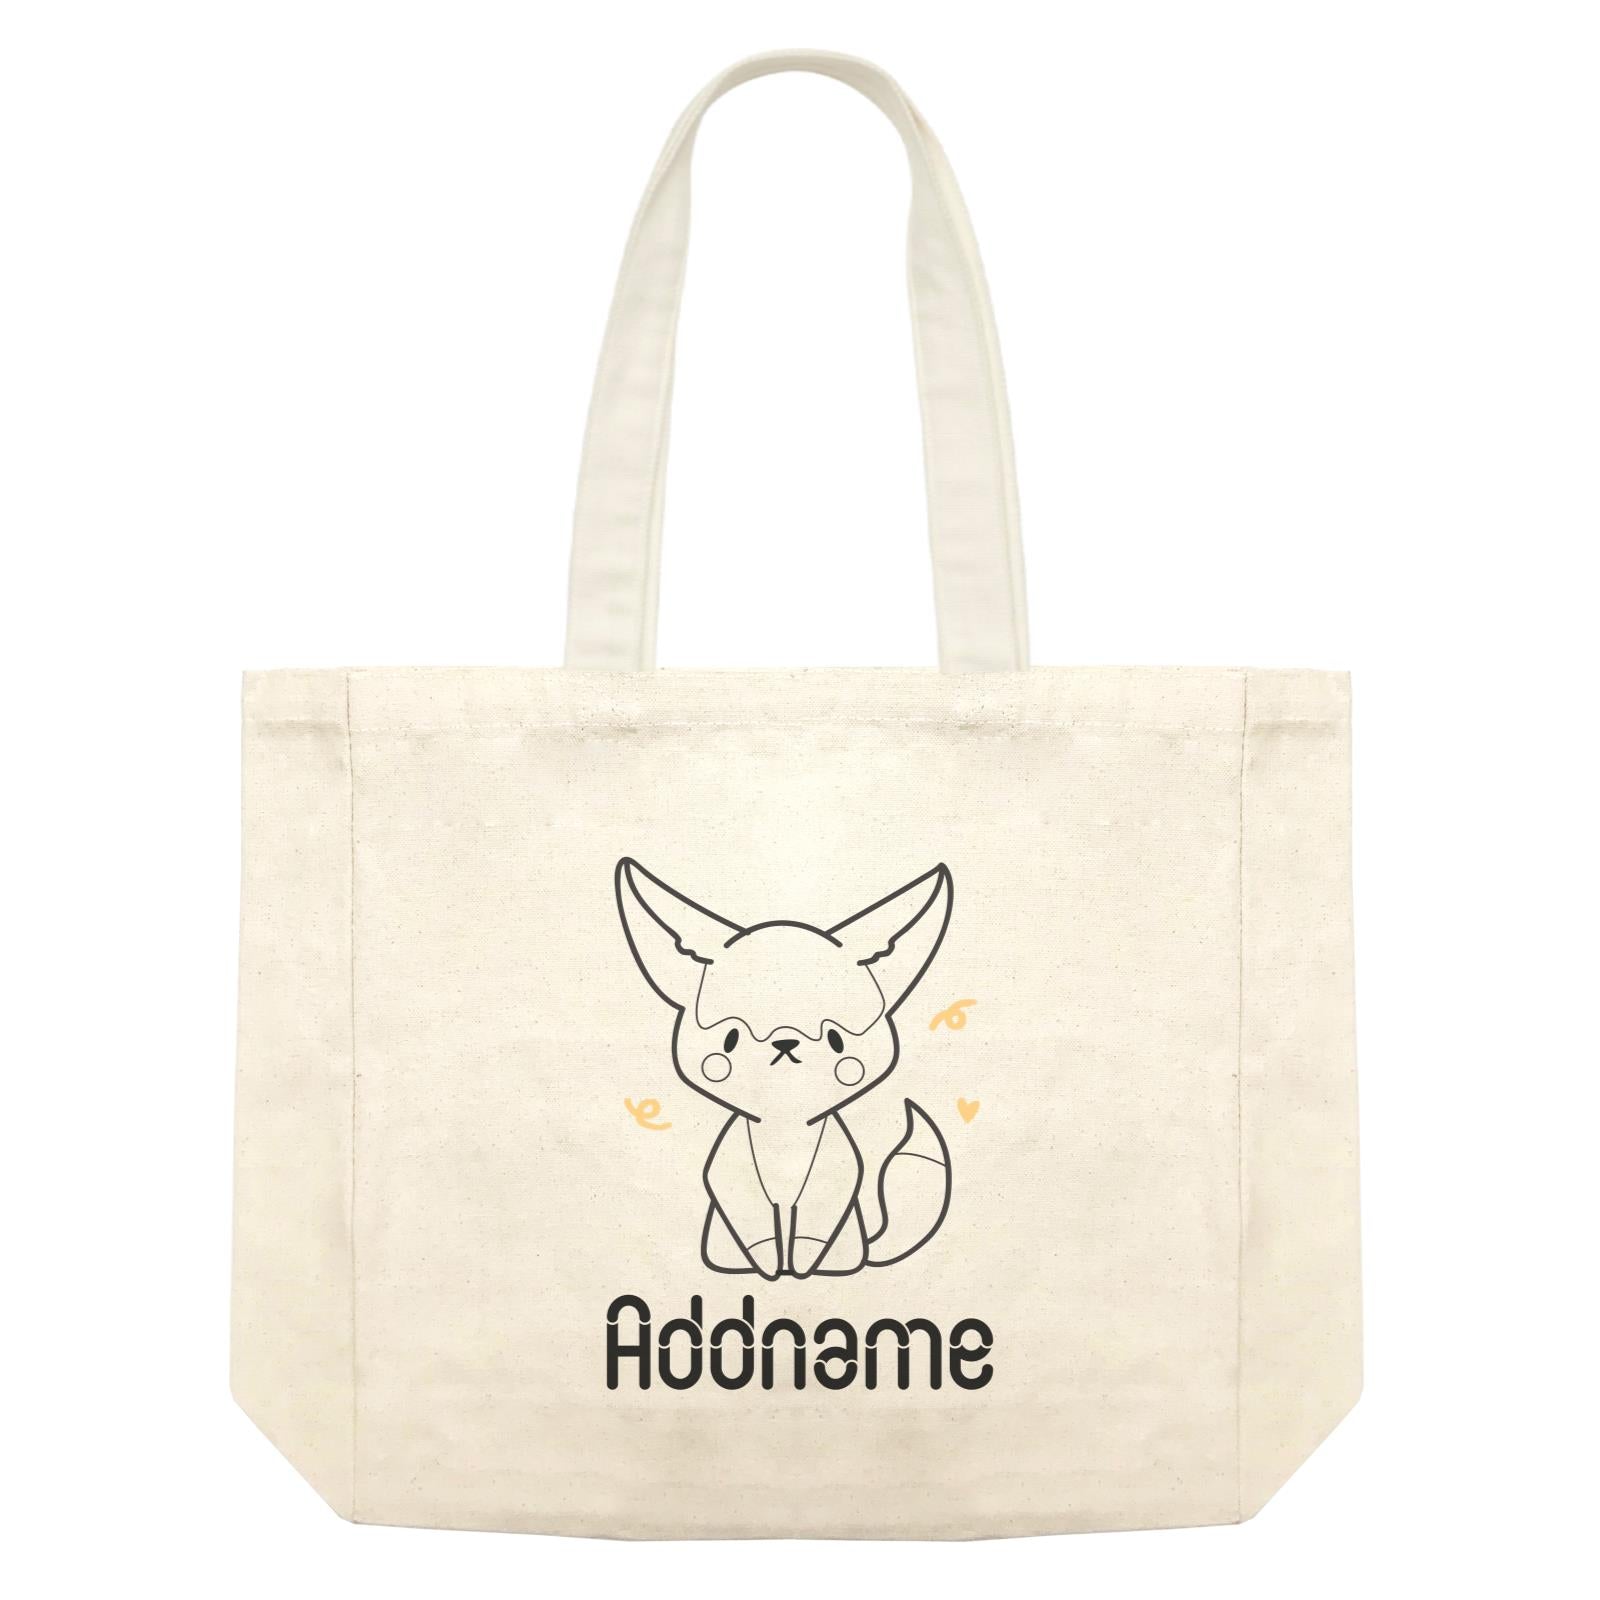 Coloring Outline Cute Hand Drawn Animals Fox Fennec Fox Addname Shopping Bag